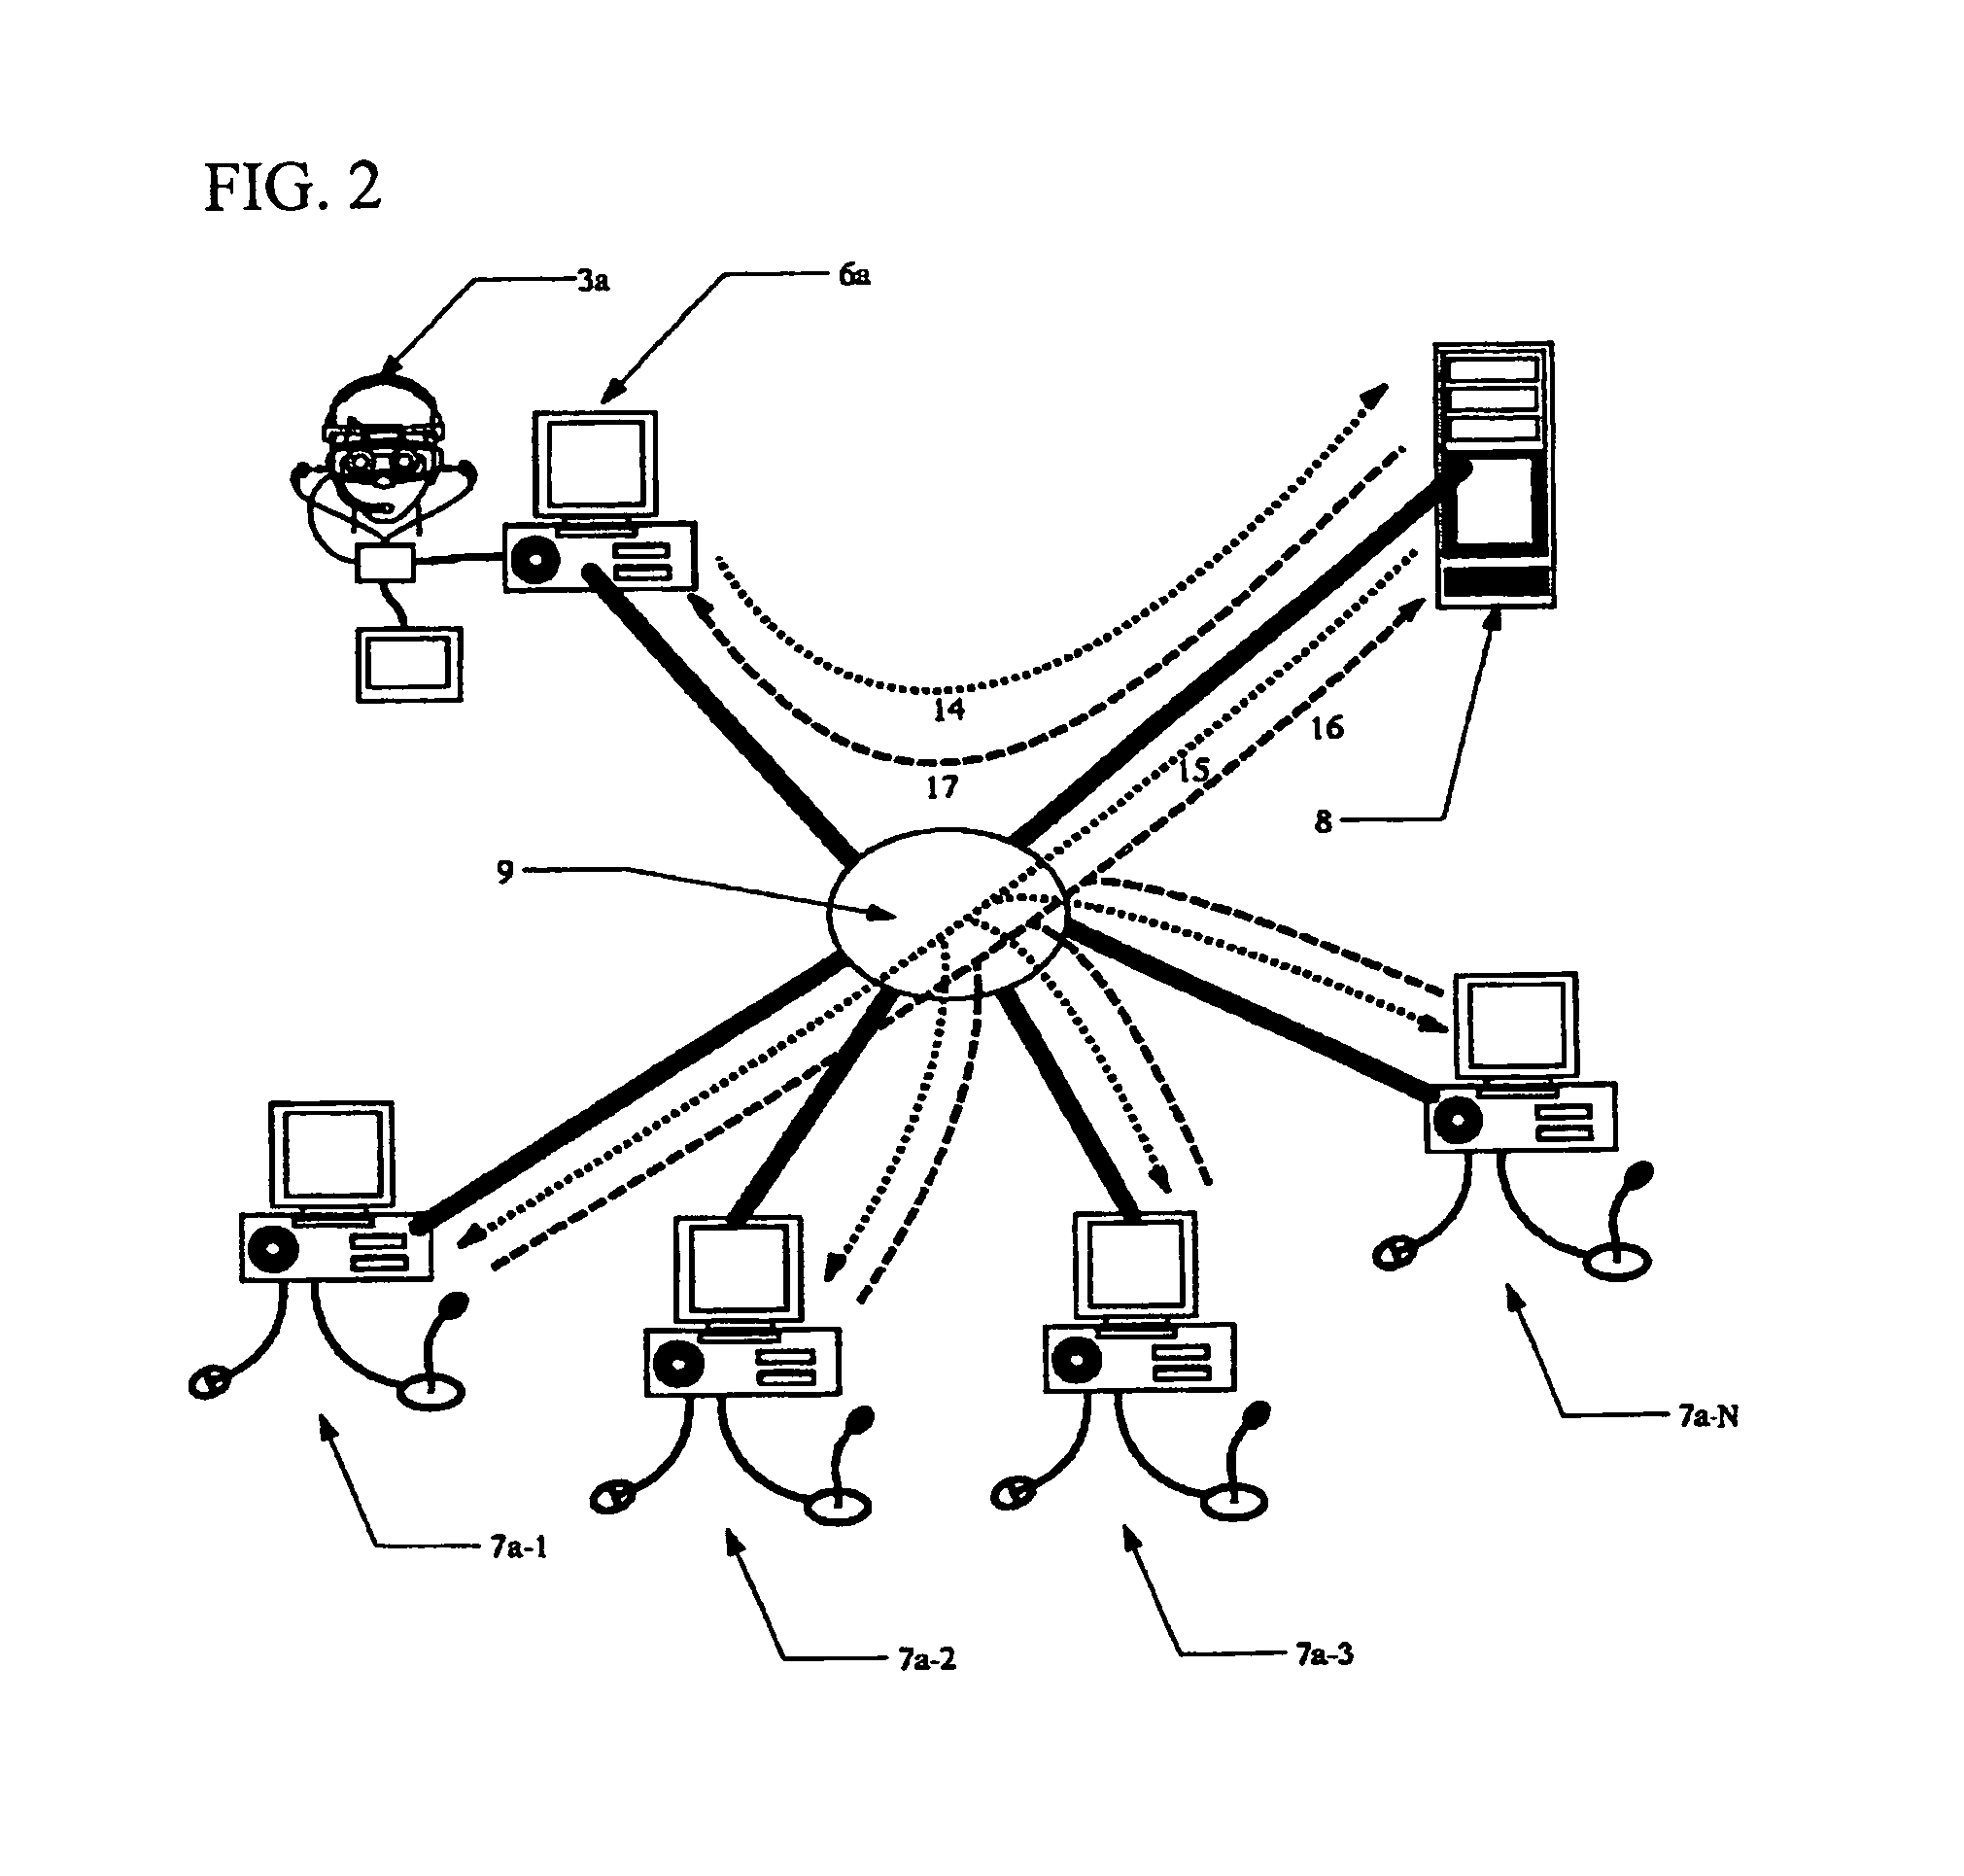 Remote internet technical guidance/education distribution system using practitioner's vision, and guidance system using communication network